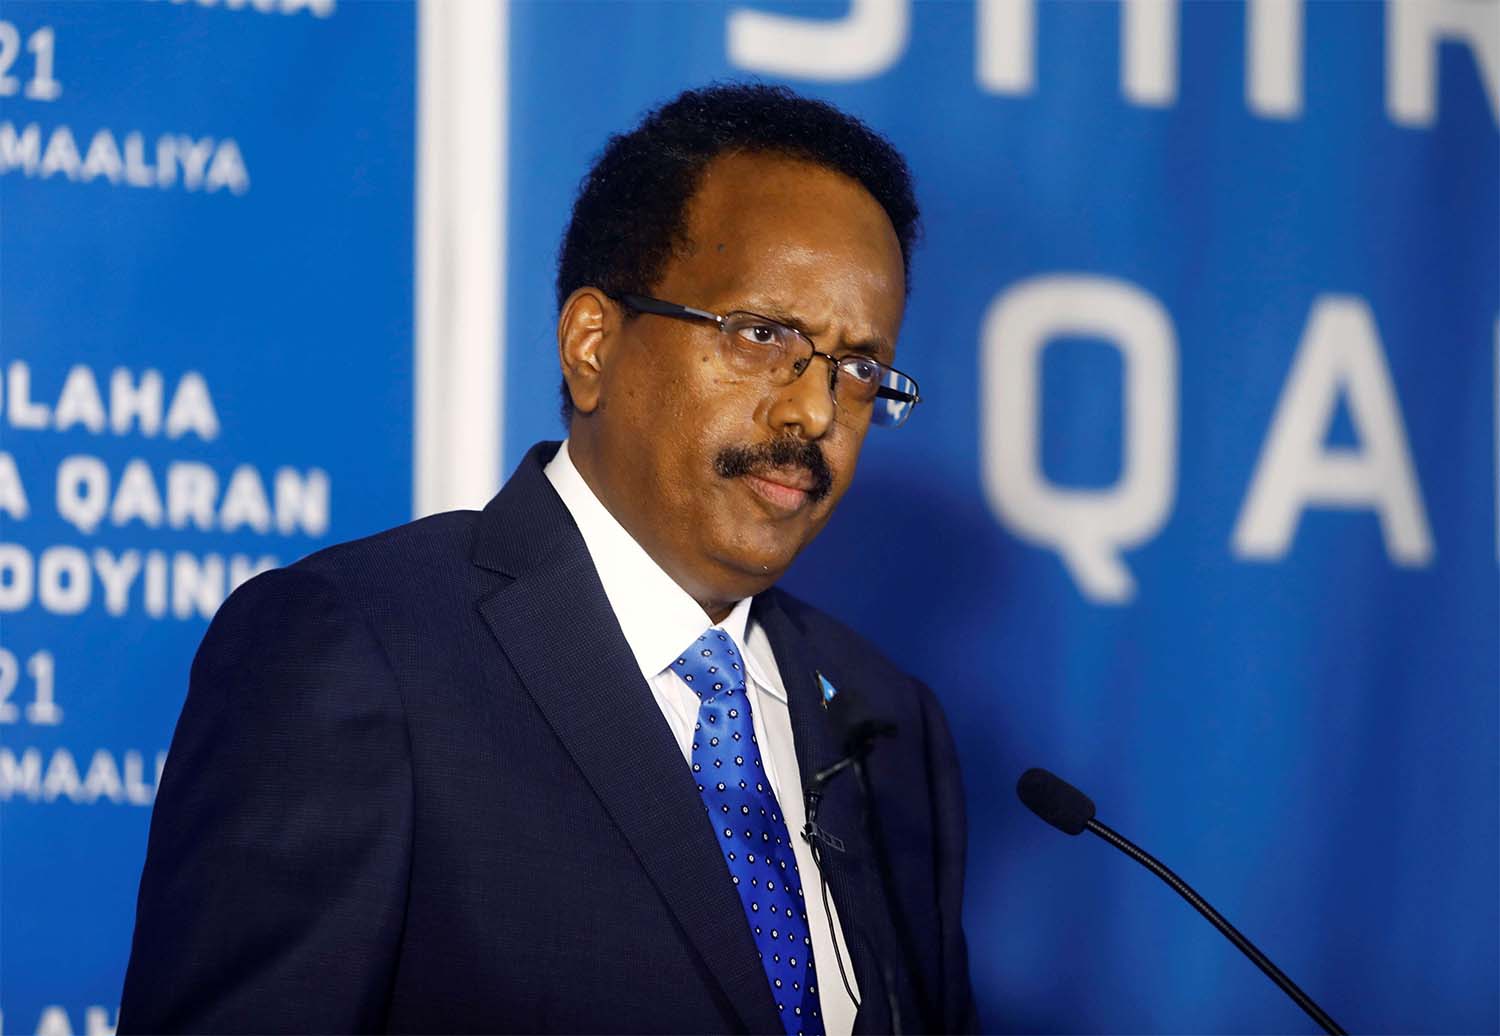 Farmaajo’s four-year term in office expired on February 8